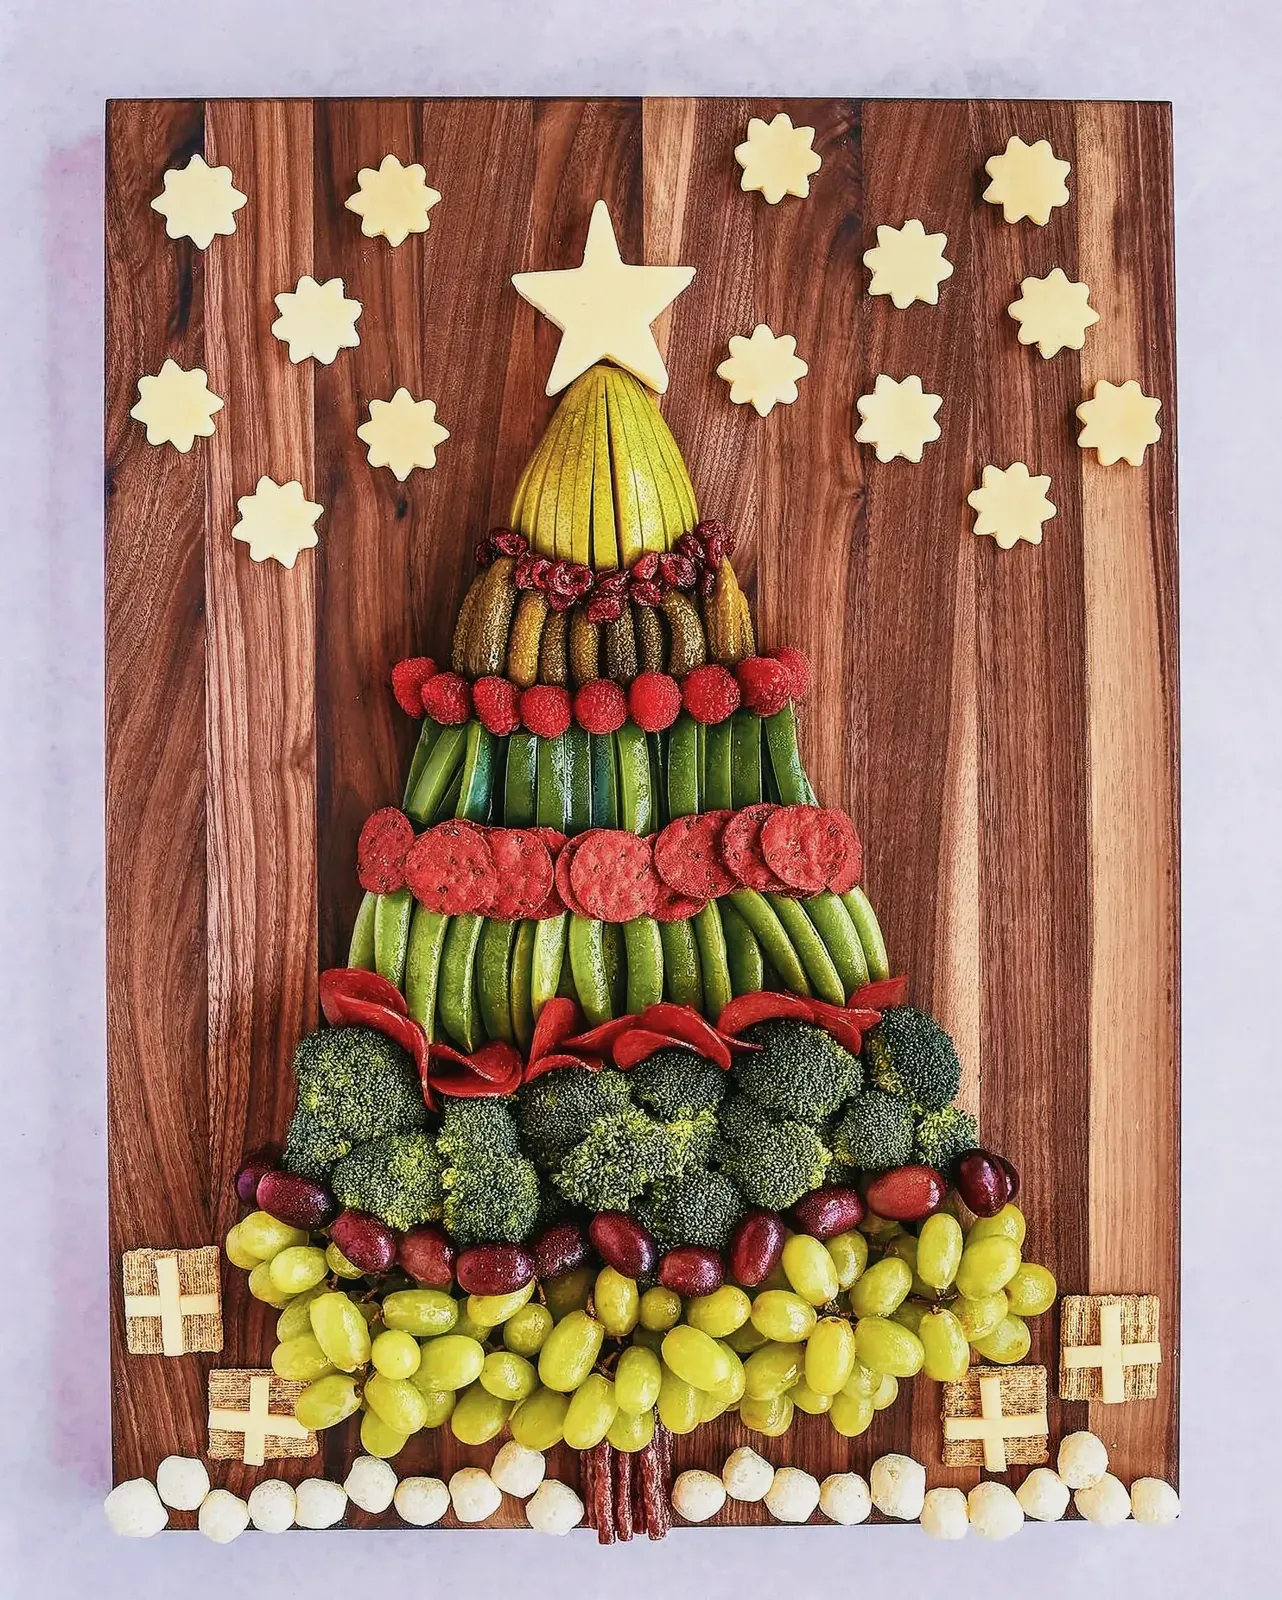 Christmas Tree Snack Board on wooden board with various festive finger foods